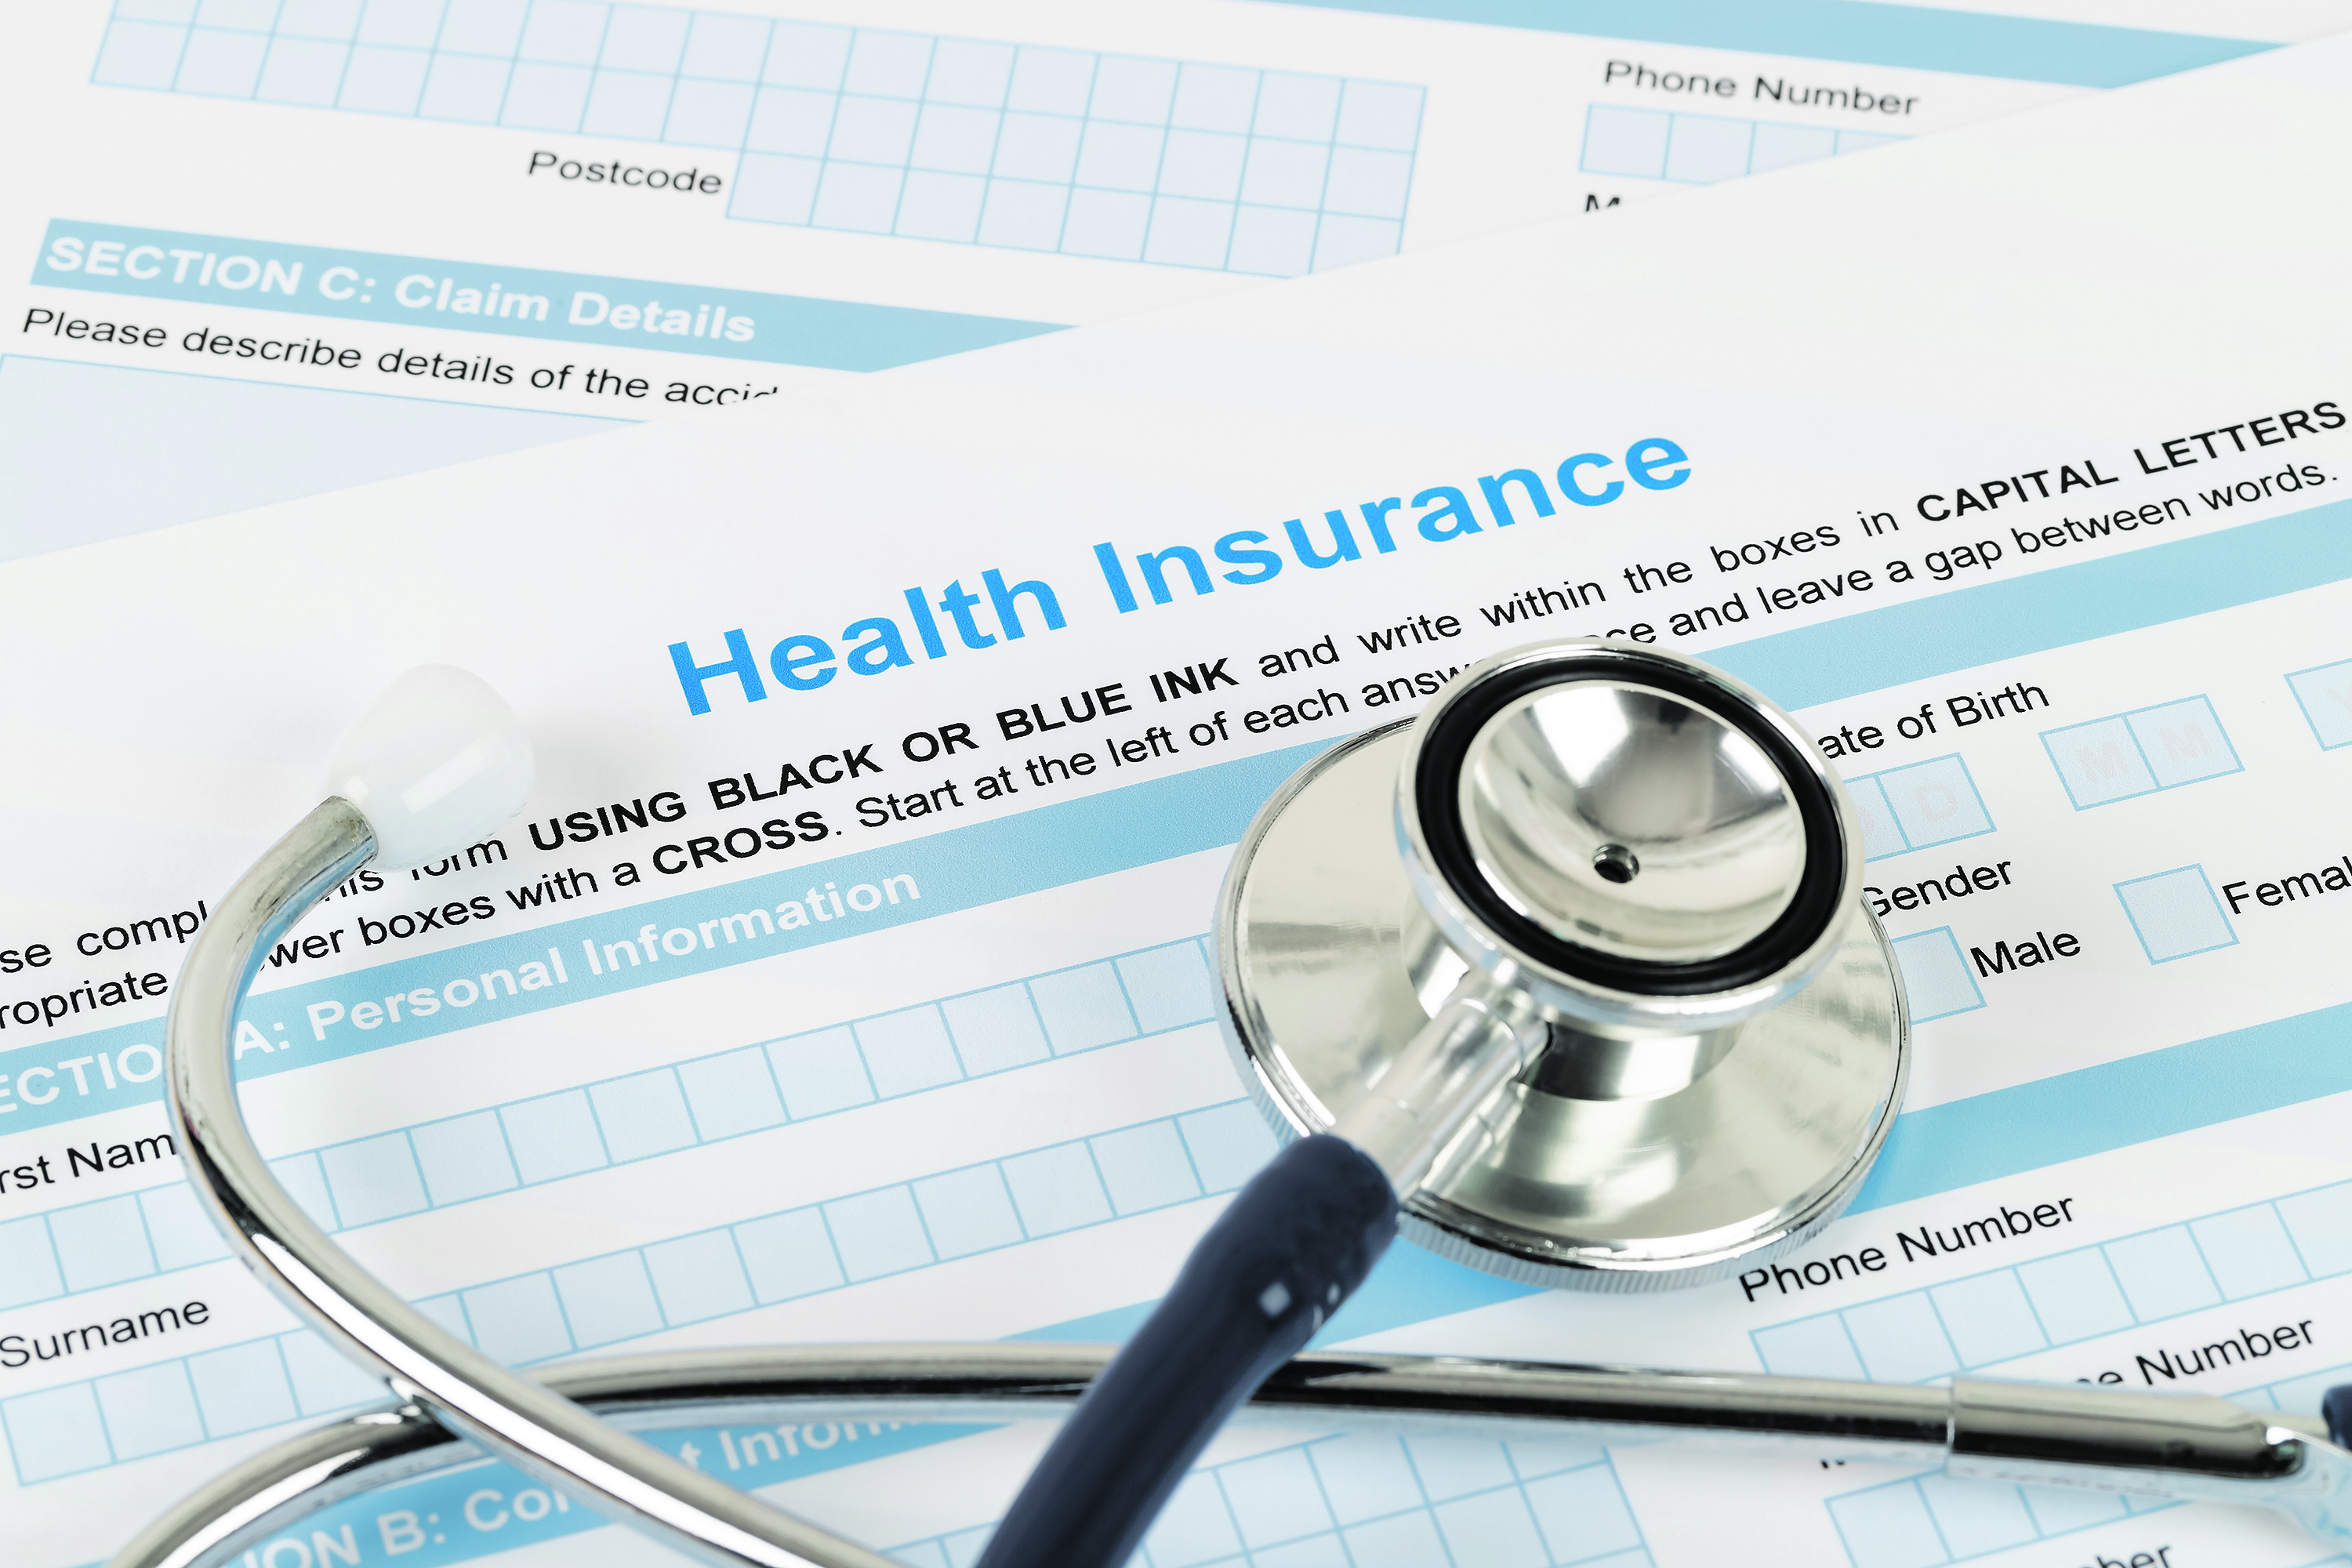 Health insurance application form with stethoscope and calculator